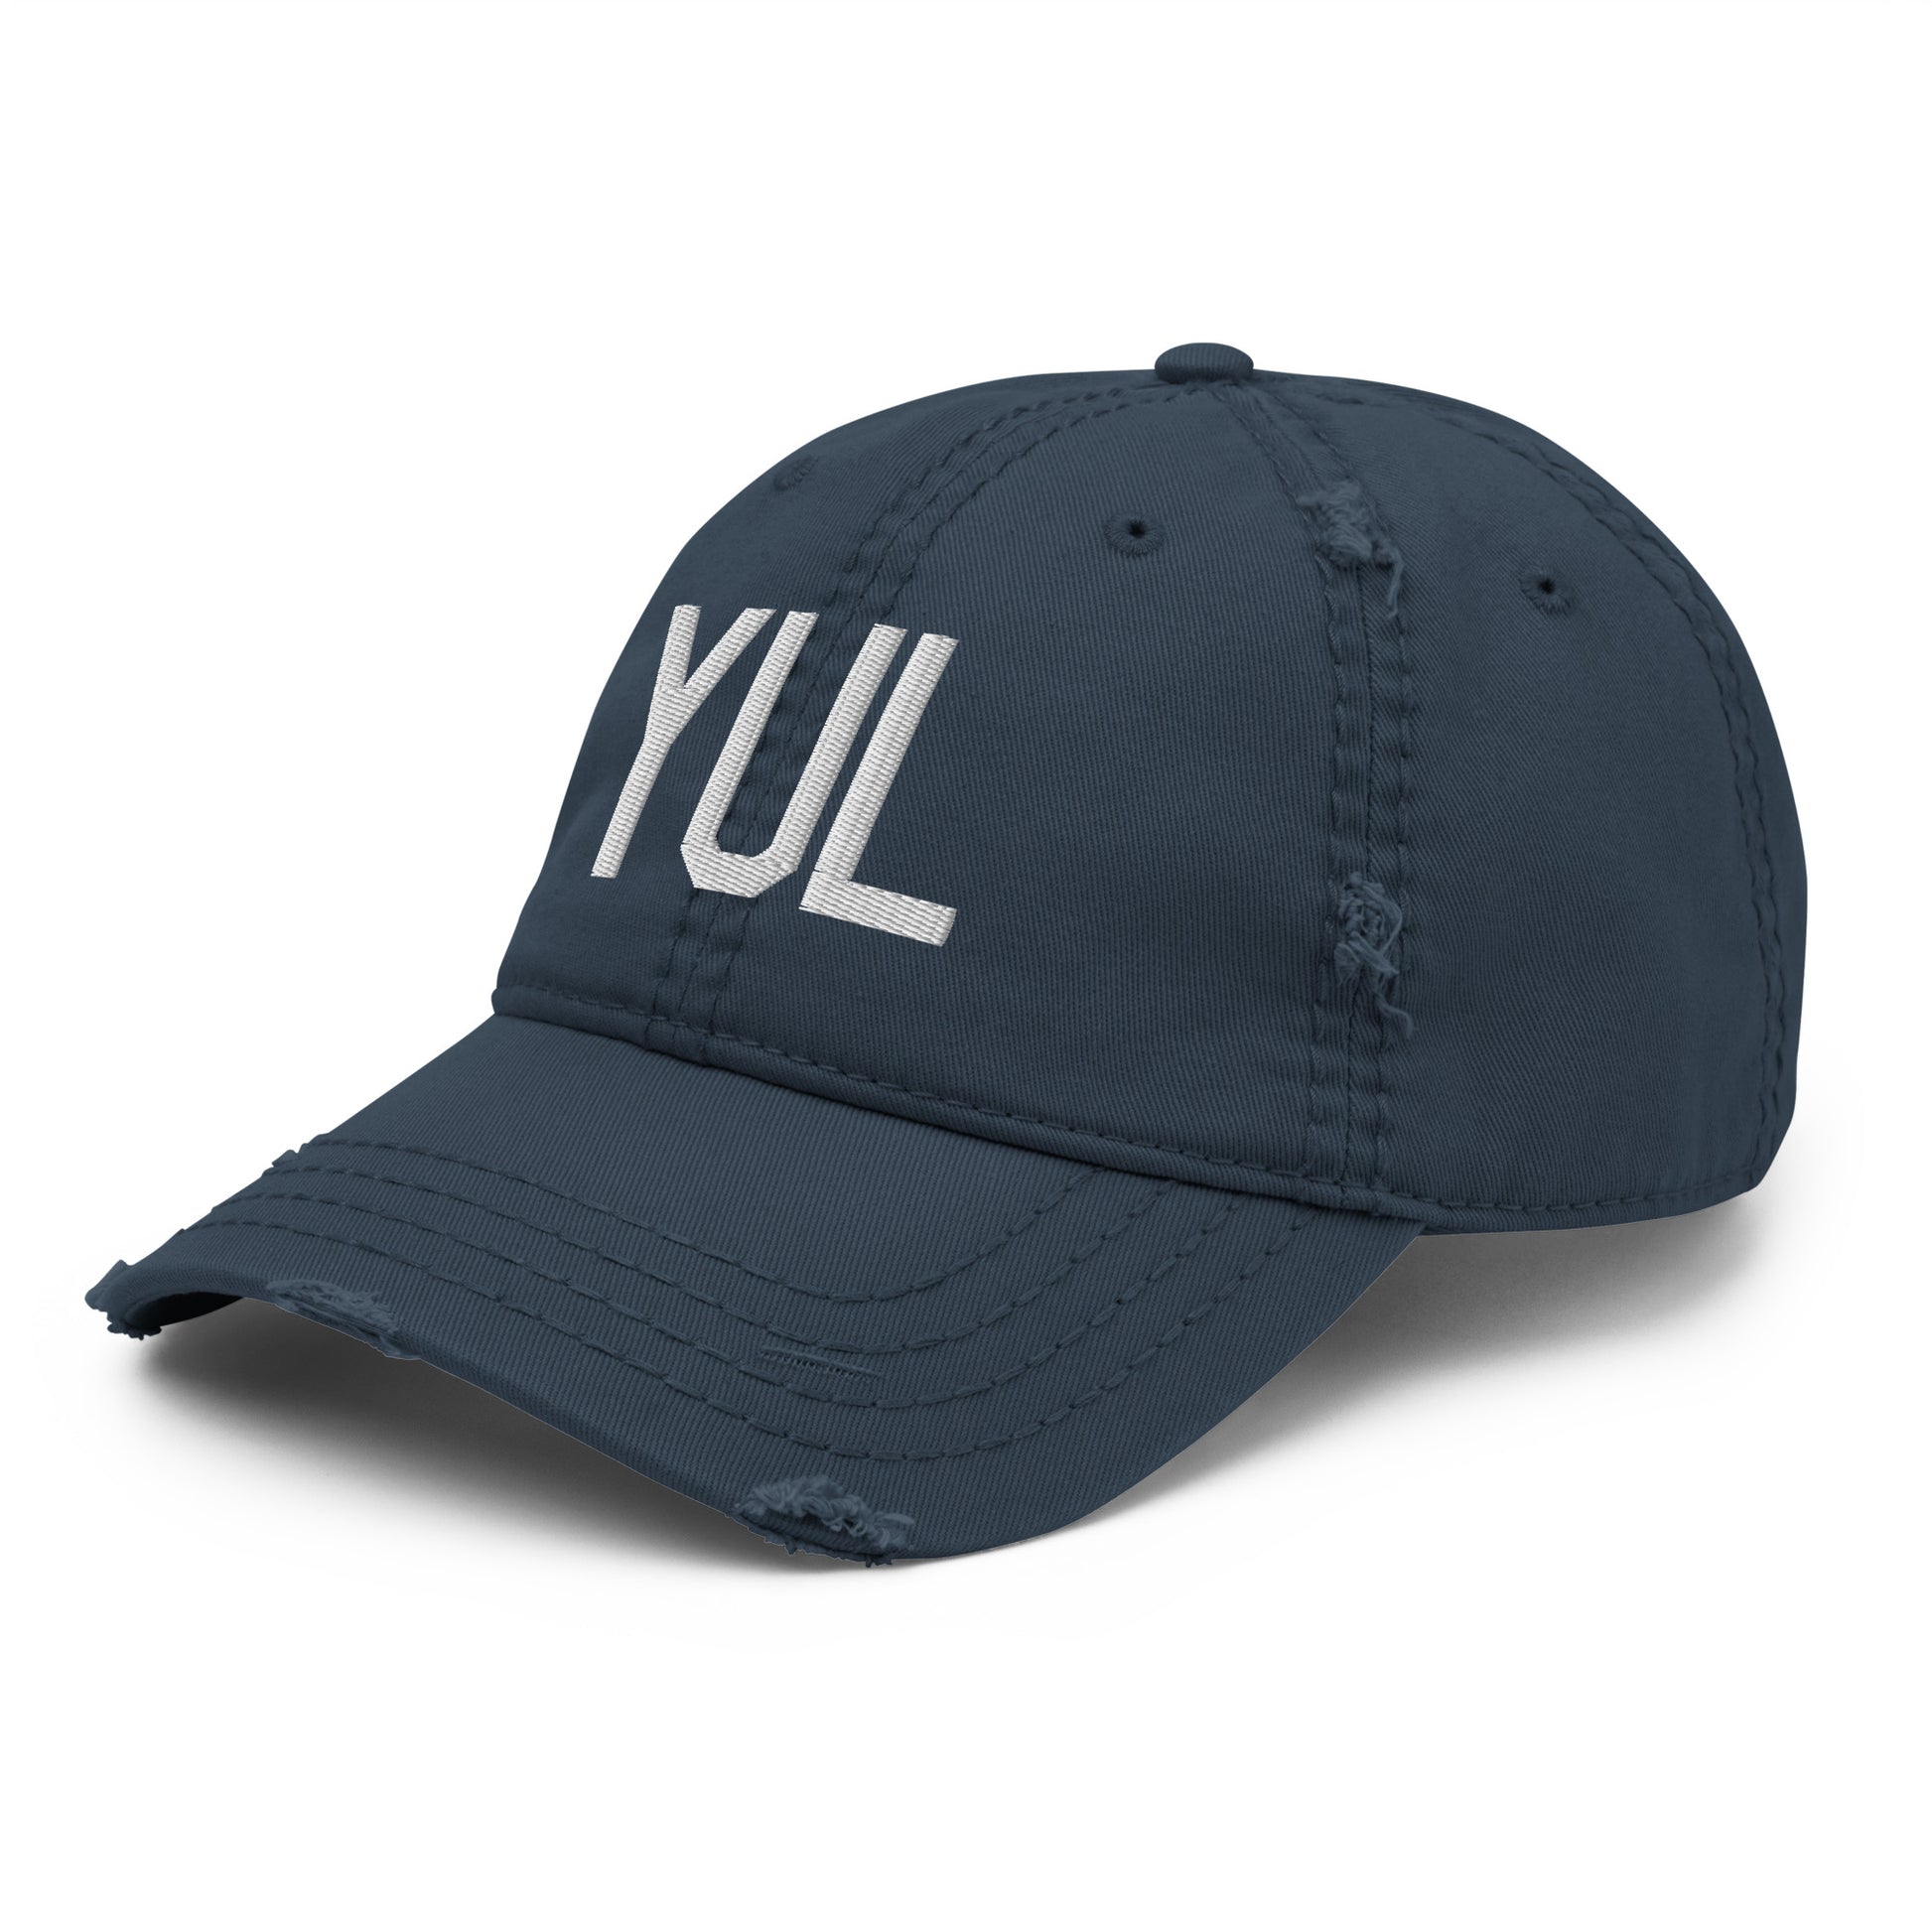 Airport Code Distressed Hat - White • YUL Montreal • YHM Designs - Image 01